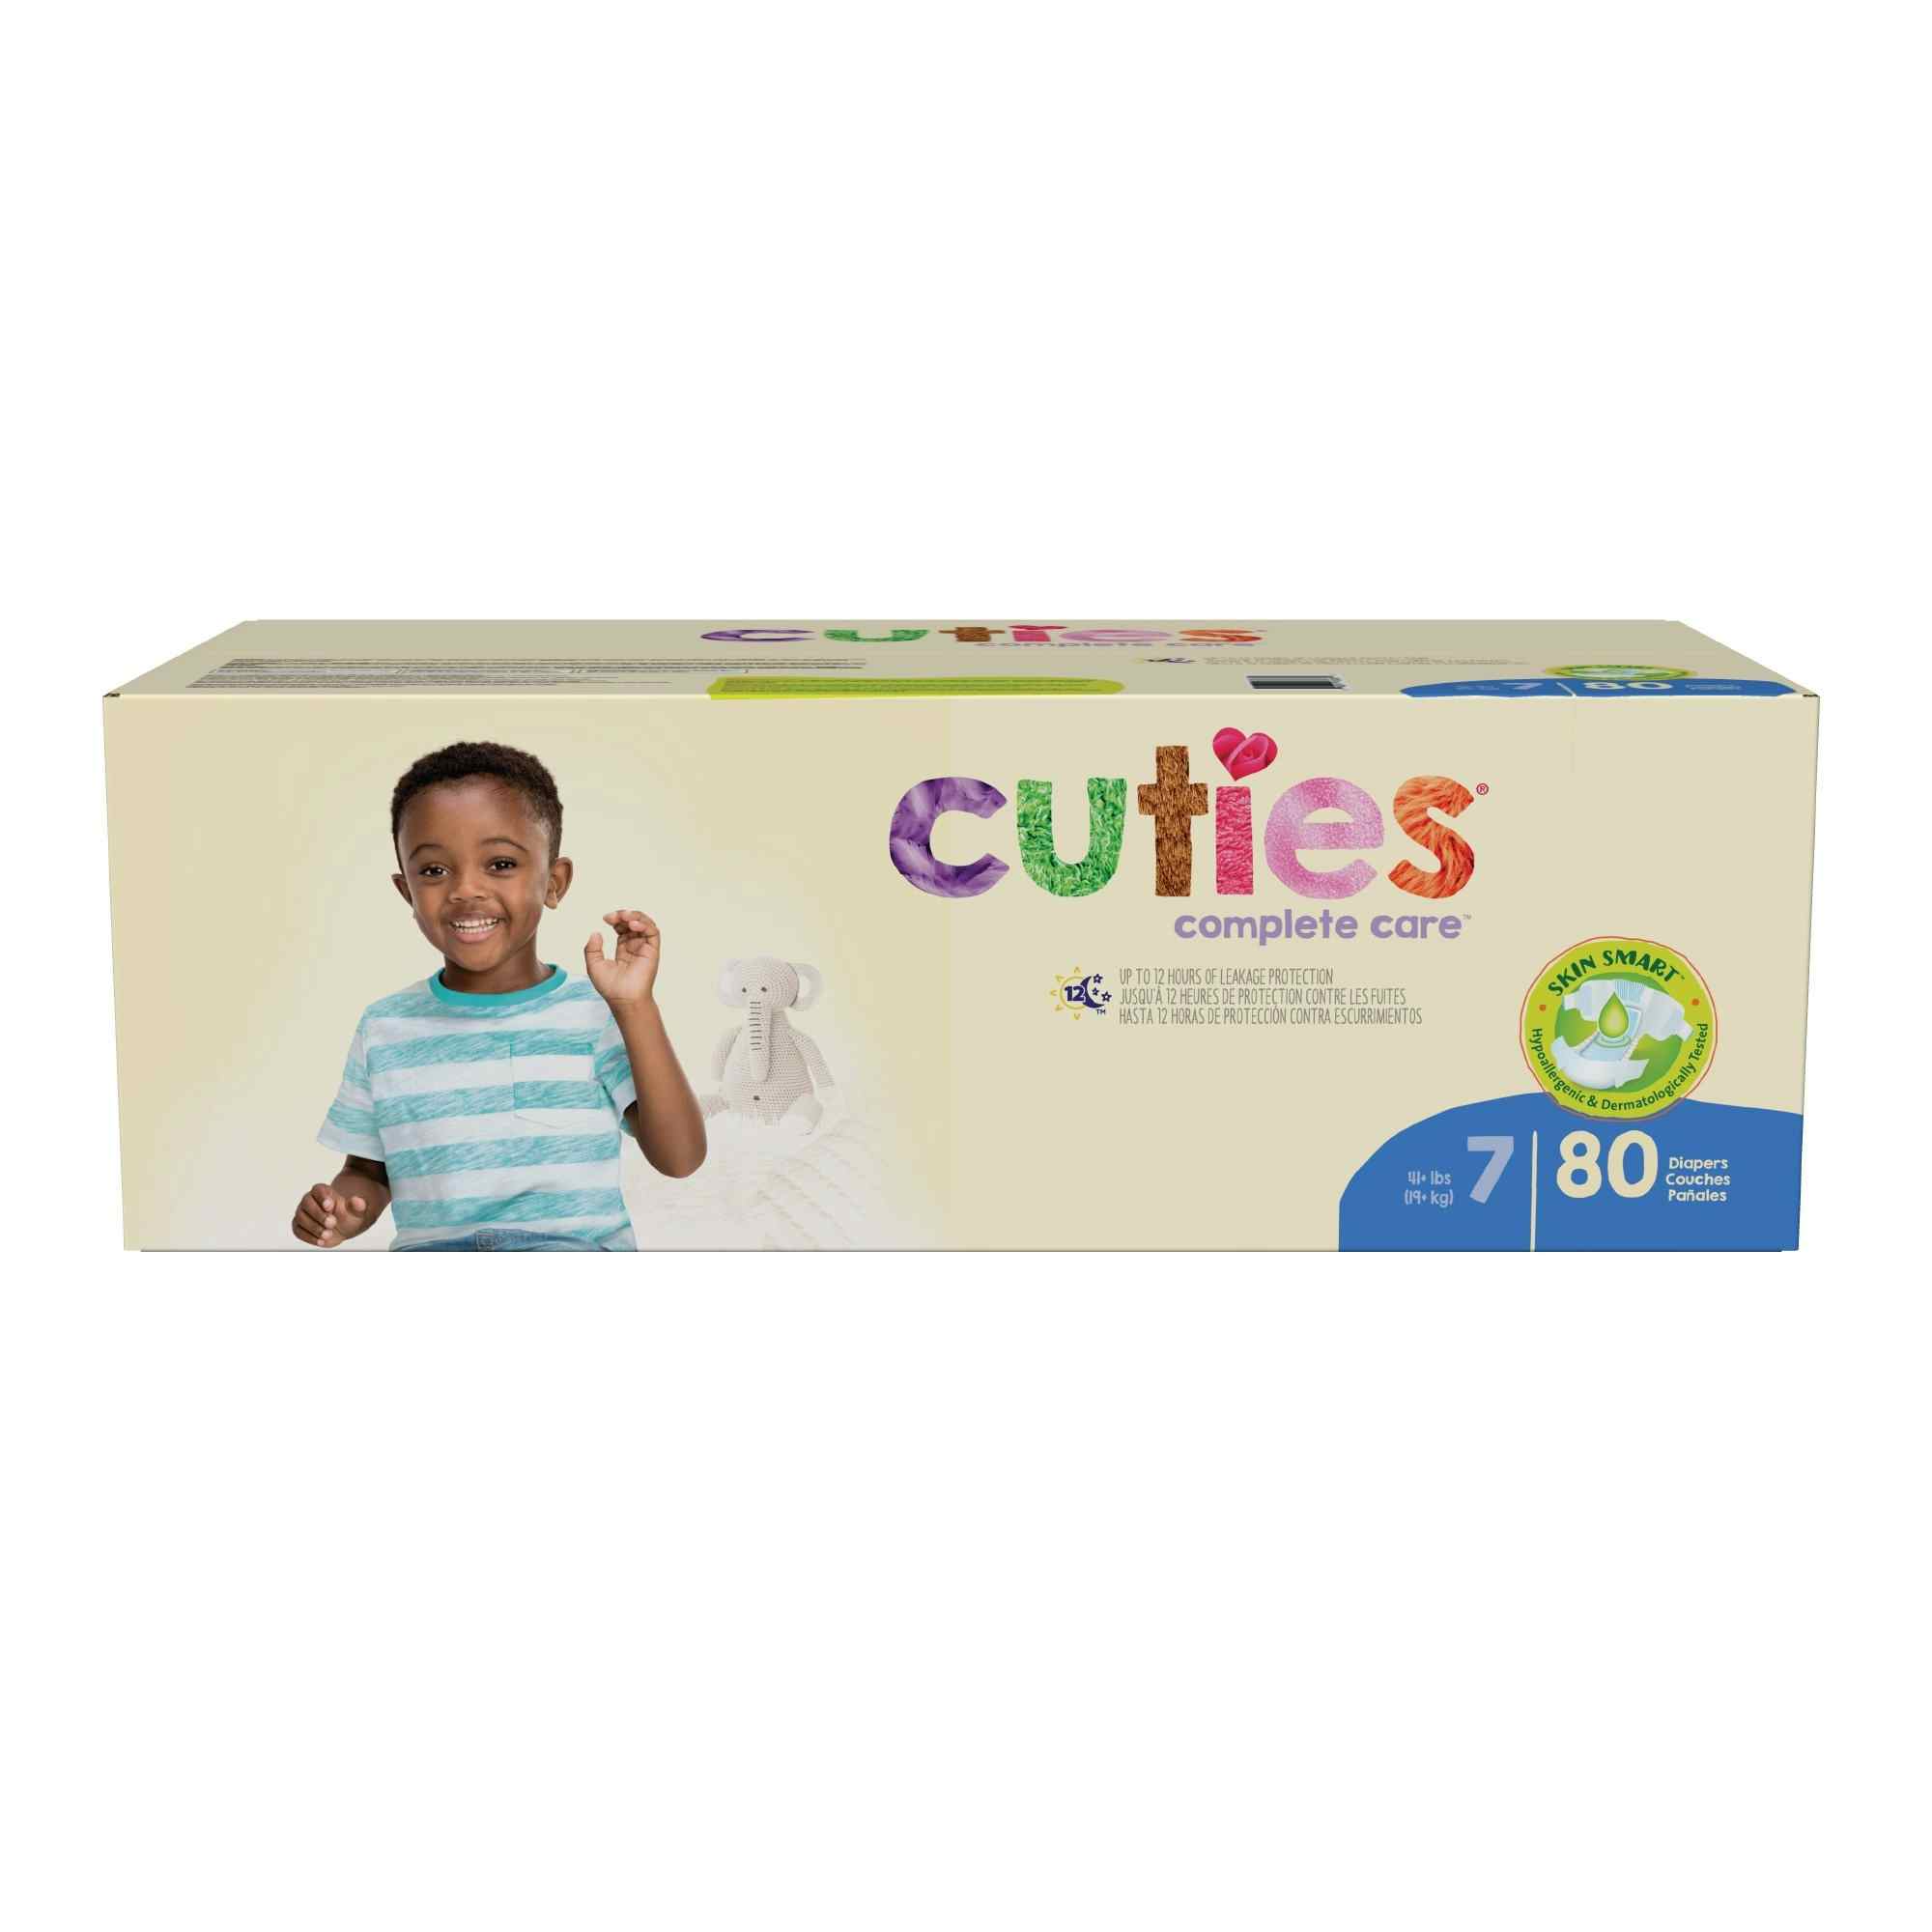 Cuties Complete Care Diapers with Tabs, Heavy Absorbency, CCC17, Size 7 (41 lbs) - Case of 80